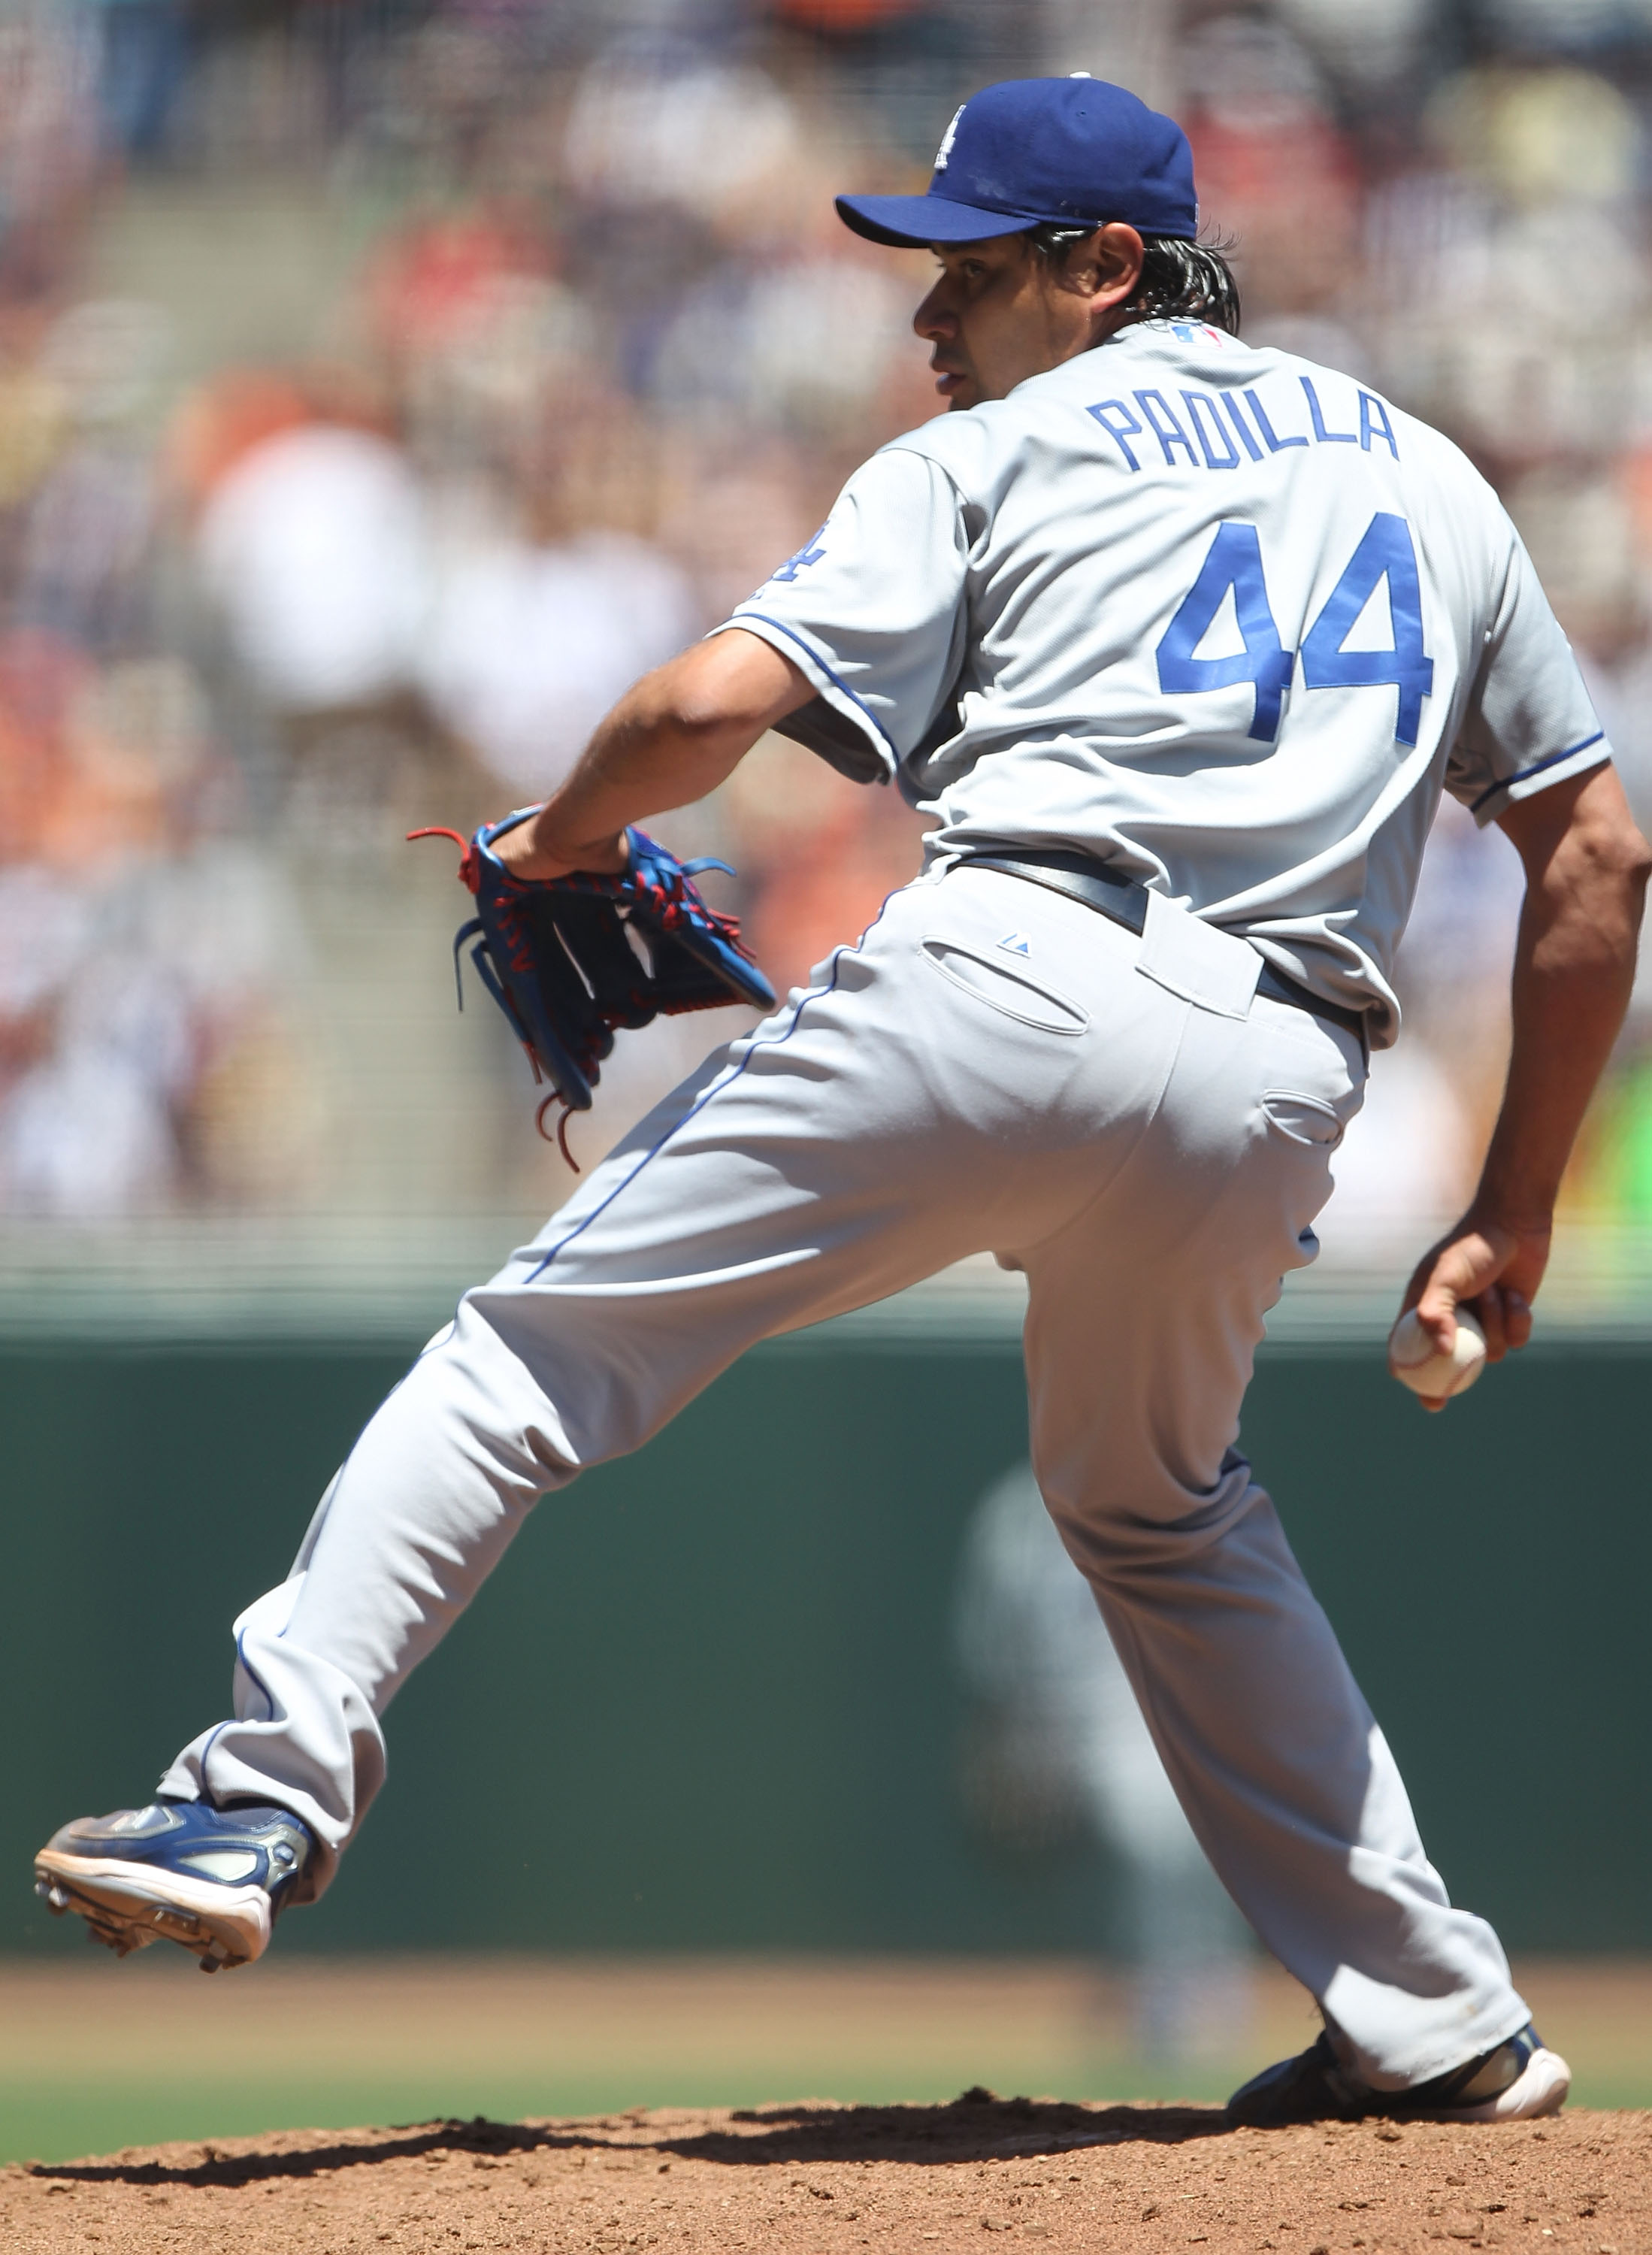 SAN FRANCISCO - JUNE 30:  Vincente Padilla #44 of the Los Angeles Dodgers pitches against the San Francisco Giants during an MLB game at AT&T Park on June 30, 2010 in San Francisco, California.  (Photo by Jed Jacobsohn/Getty Images)